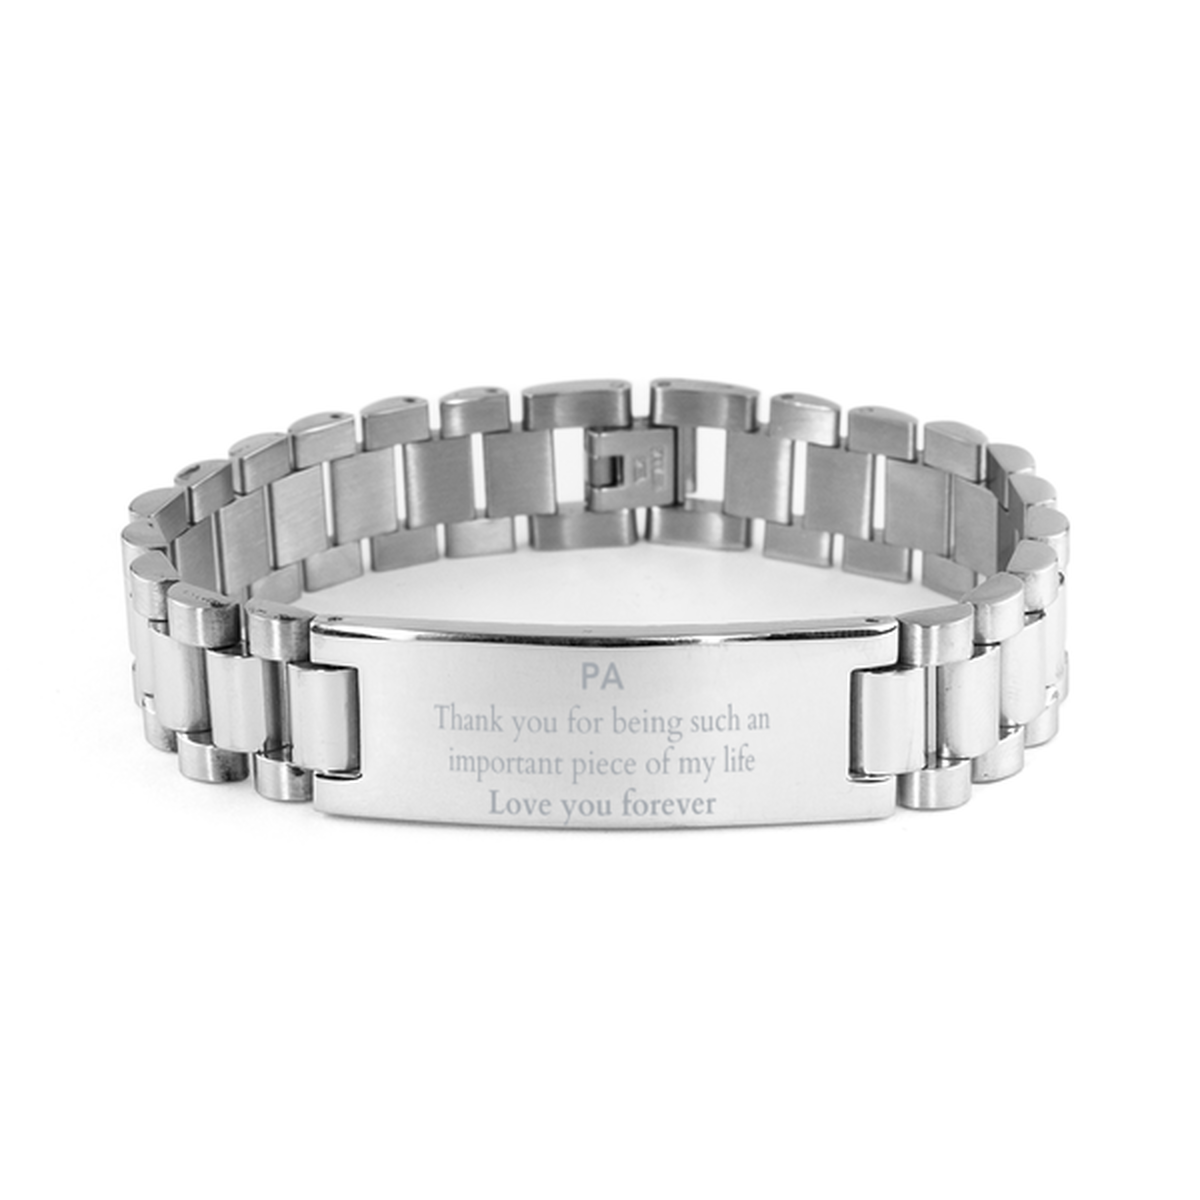 Appropriate Pa Ladder Stainless Steel Bracelet Epic Birthday Gifts for Pa Thank you for being such an important piece of my life Pa Christmas Mothers Fathers Day